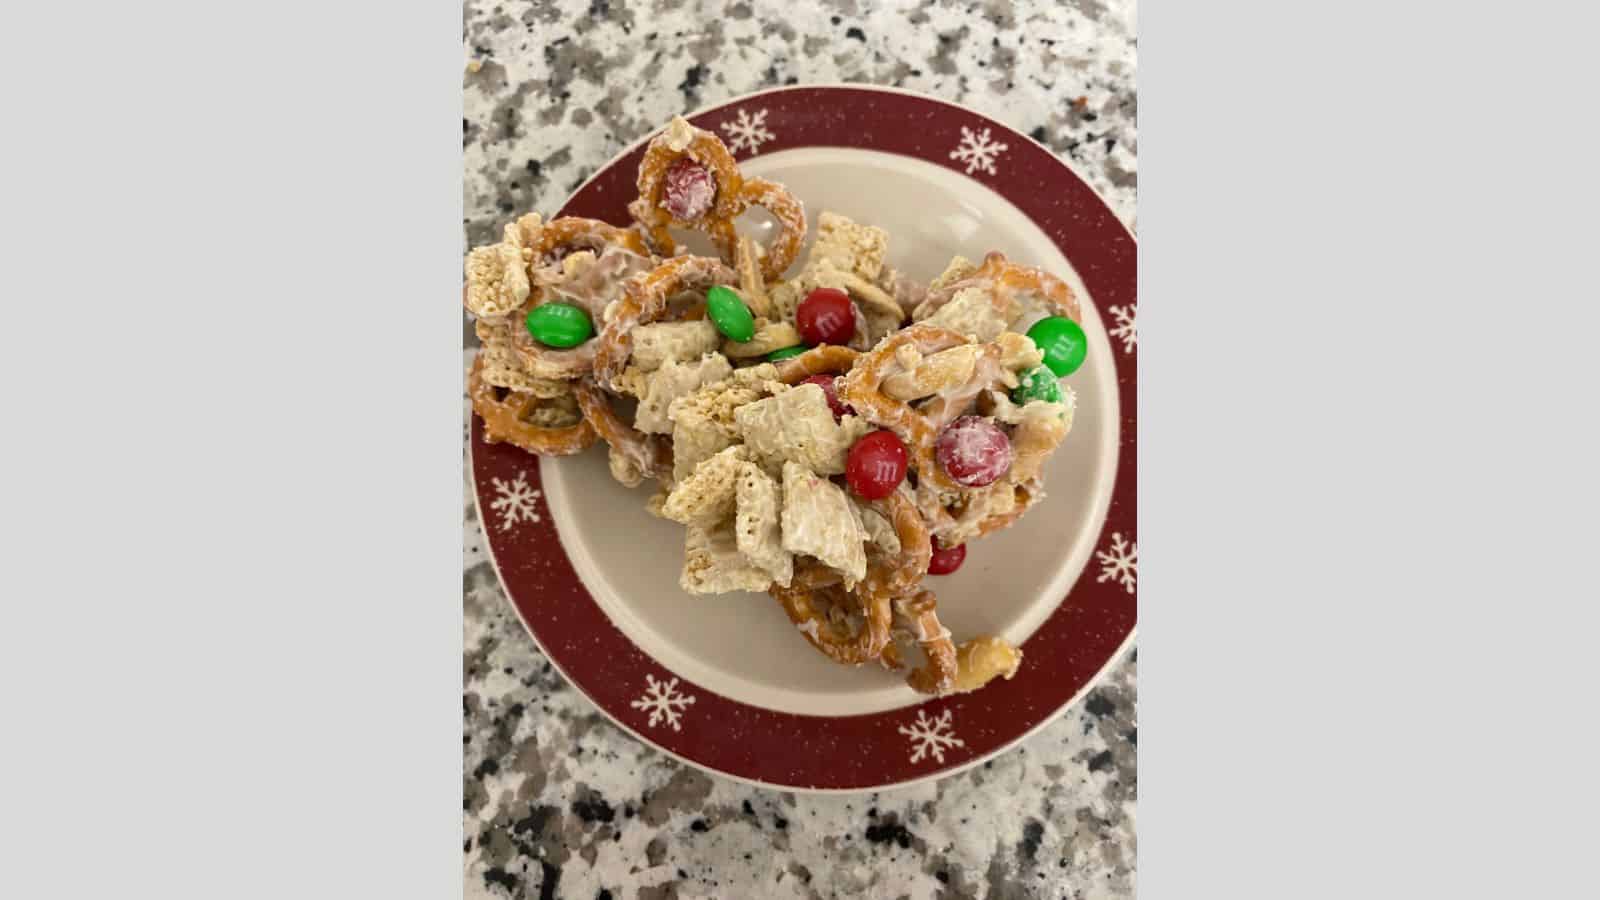 A plate topped with white chocolate covered cereal and m&m's.